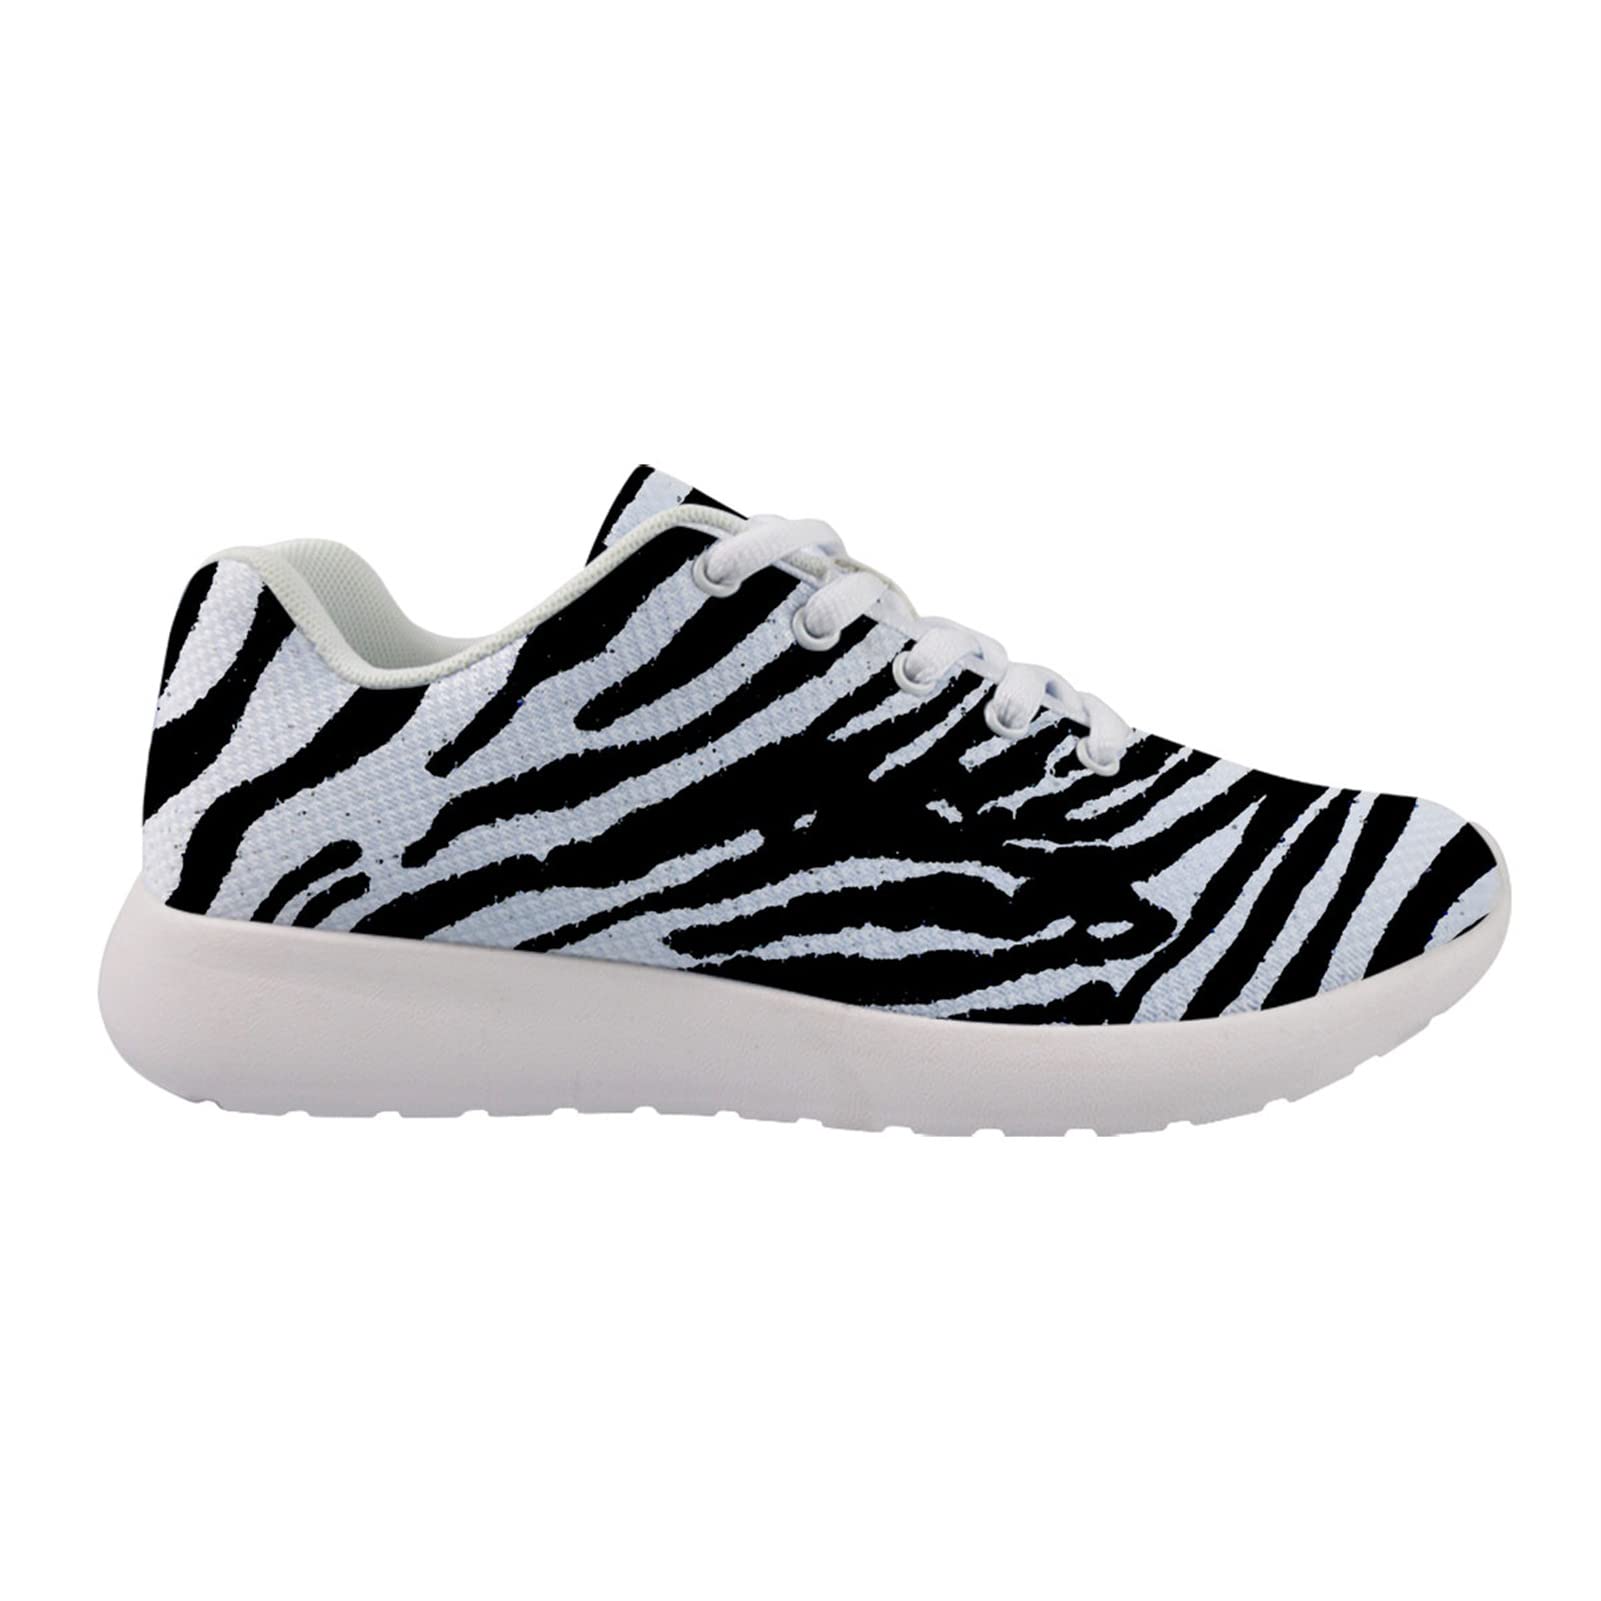 FOR U DESIGNS Stylish Sneakers for Women White and Black Zebra Printing Walking Running Shoes for Gym Sports Athletic Sneakers Lace Up